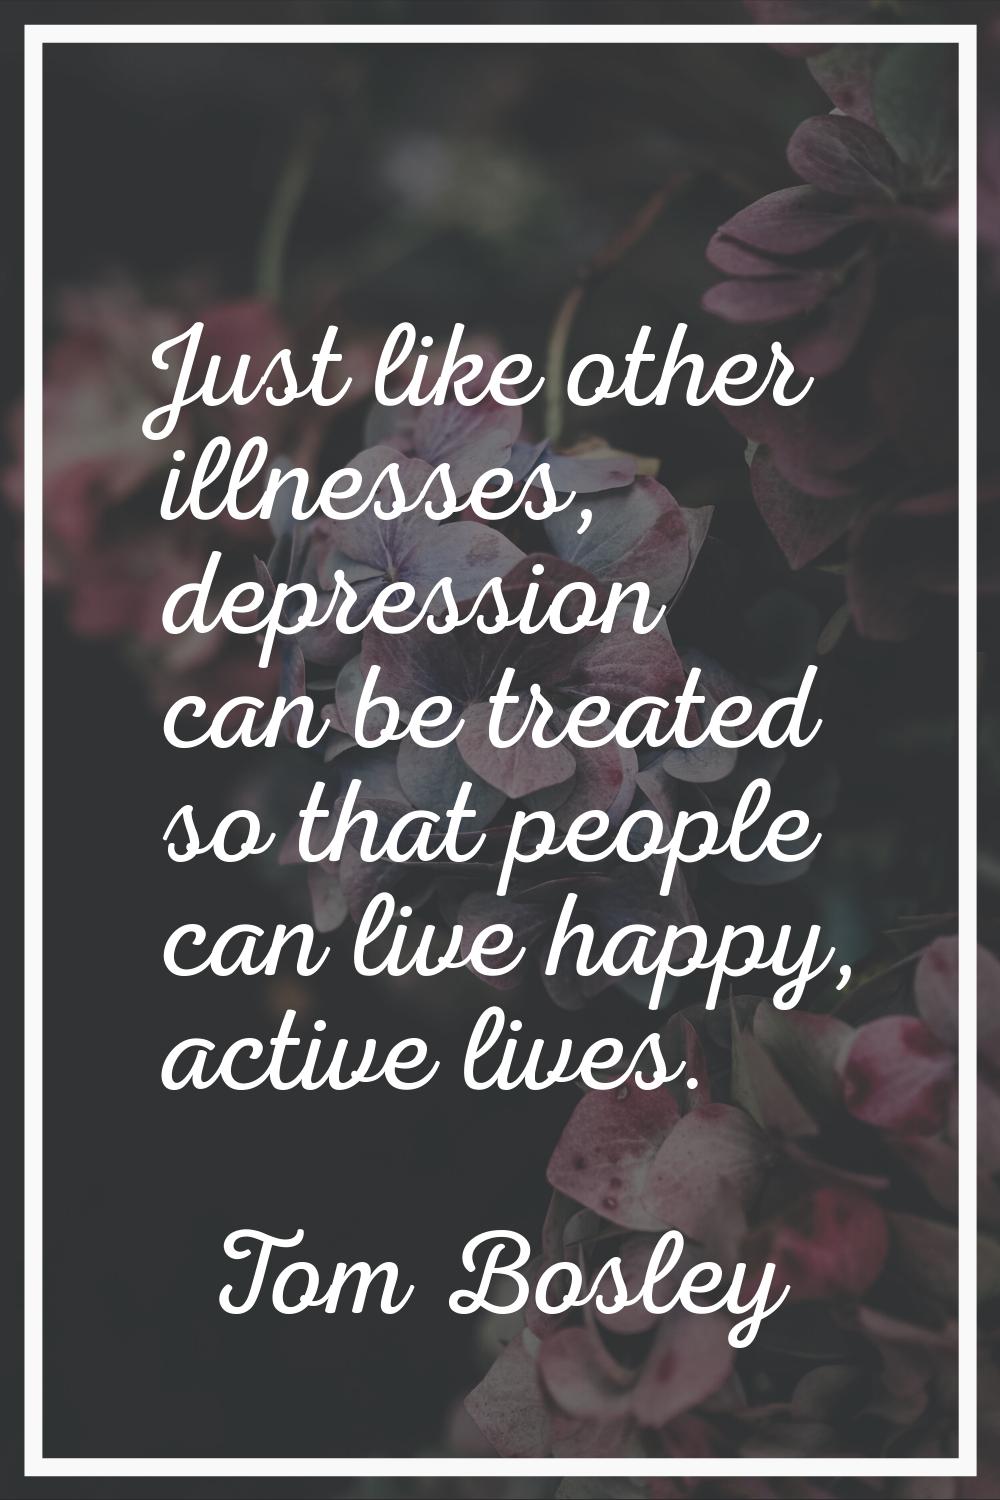 Just like other illnesses, depression can be treated so that people can live happy, active lives.